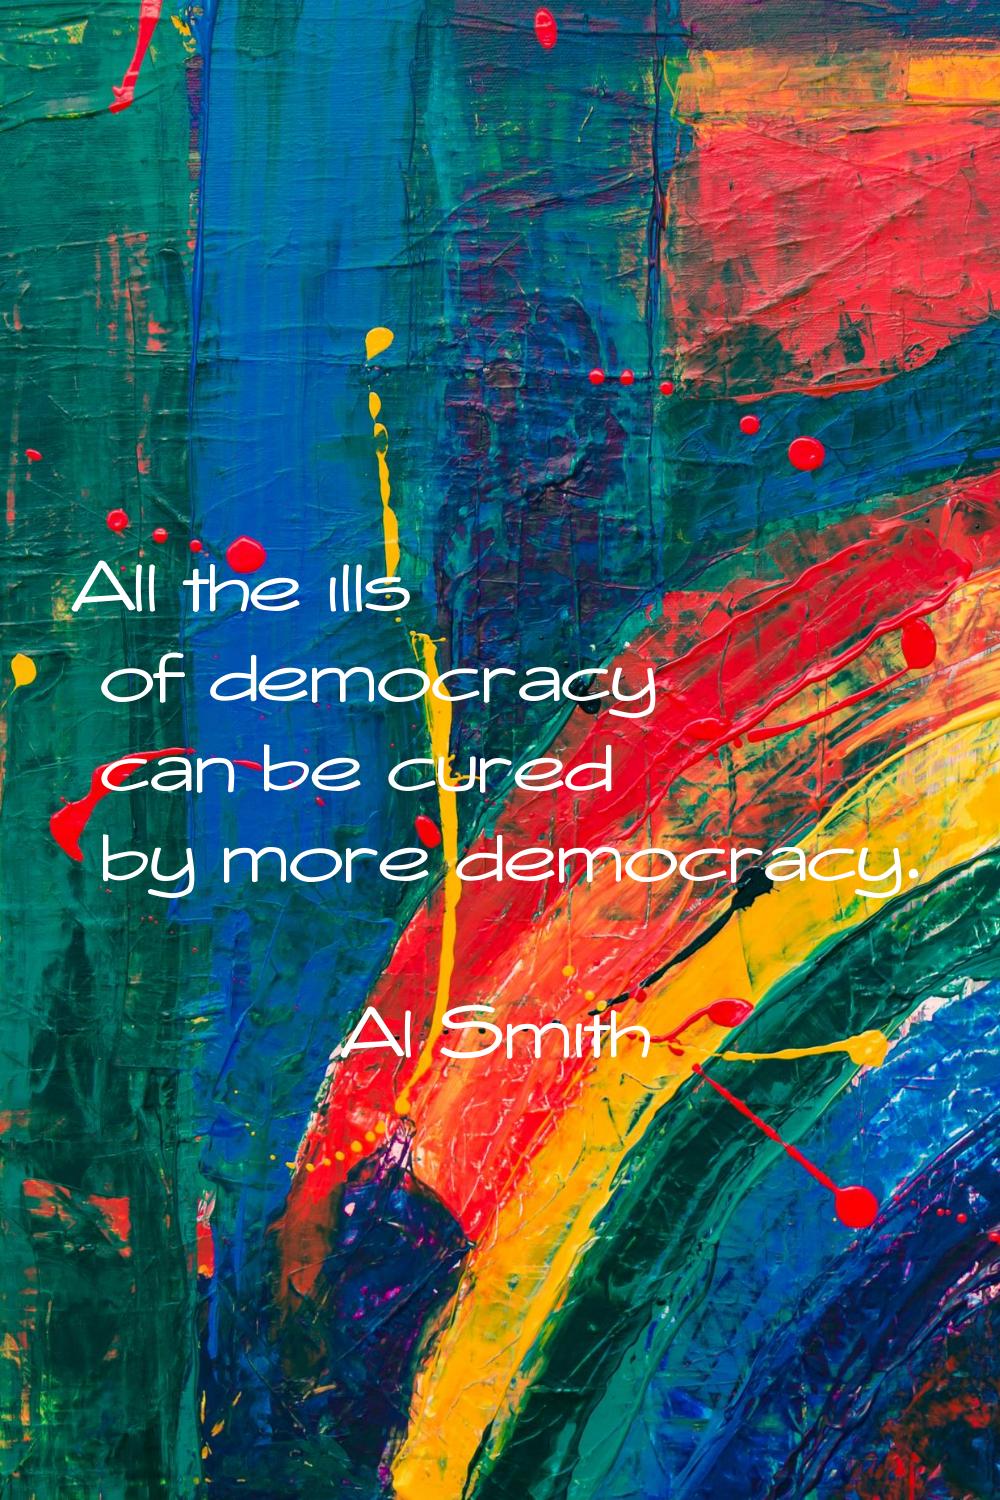 All the ills of democracy can be cured by more democracy.